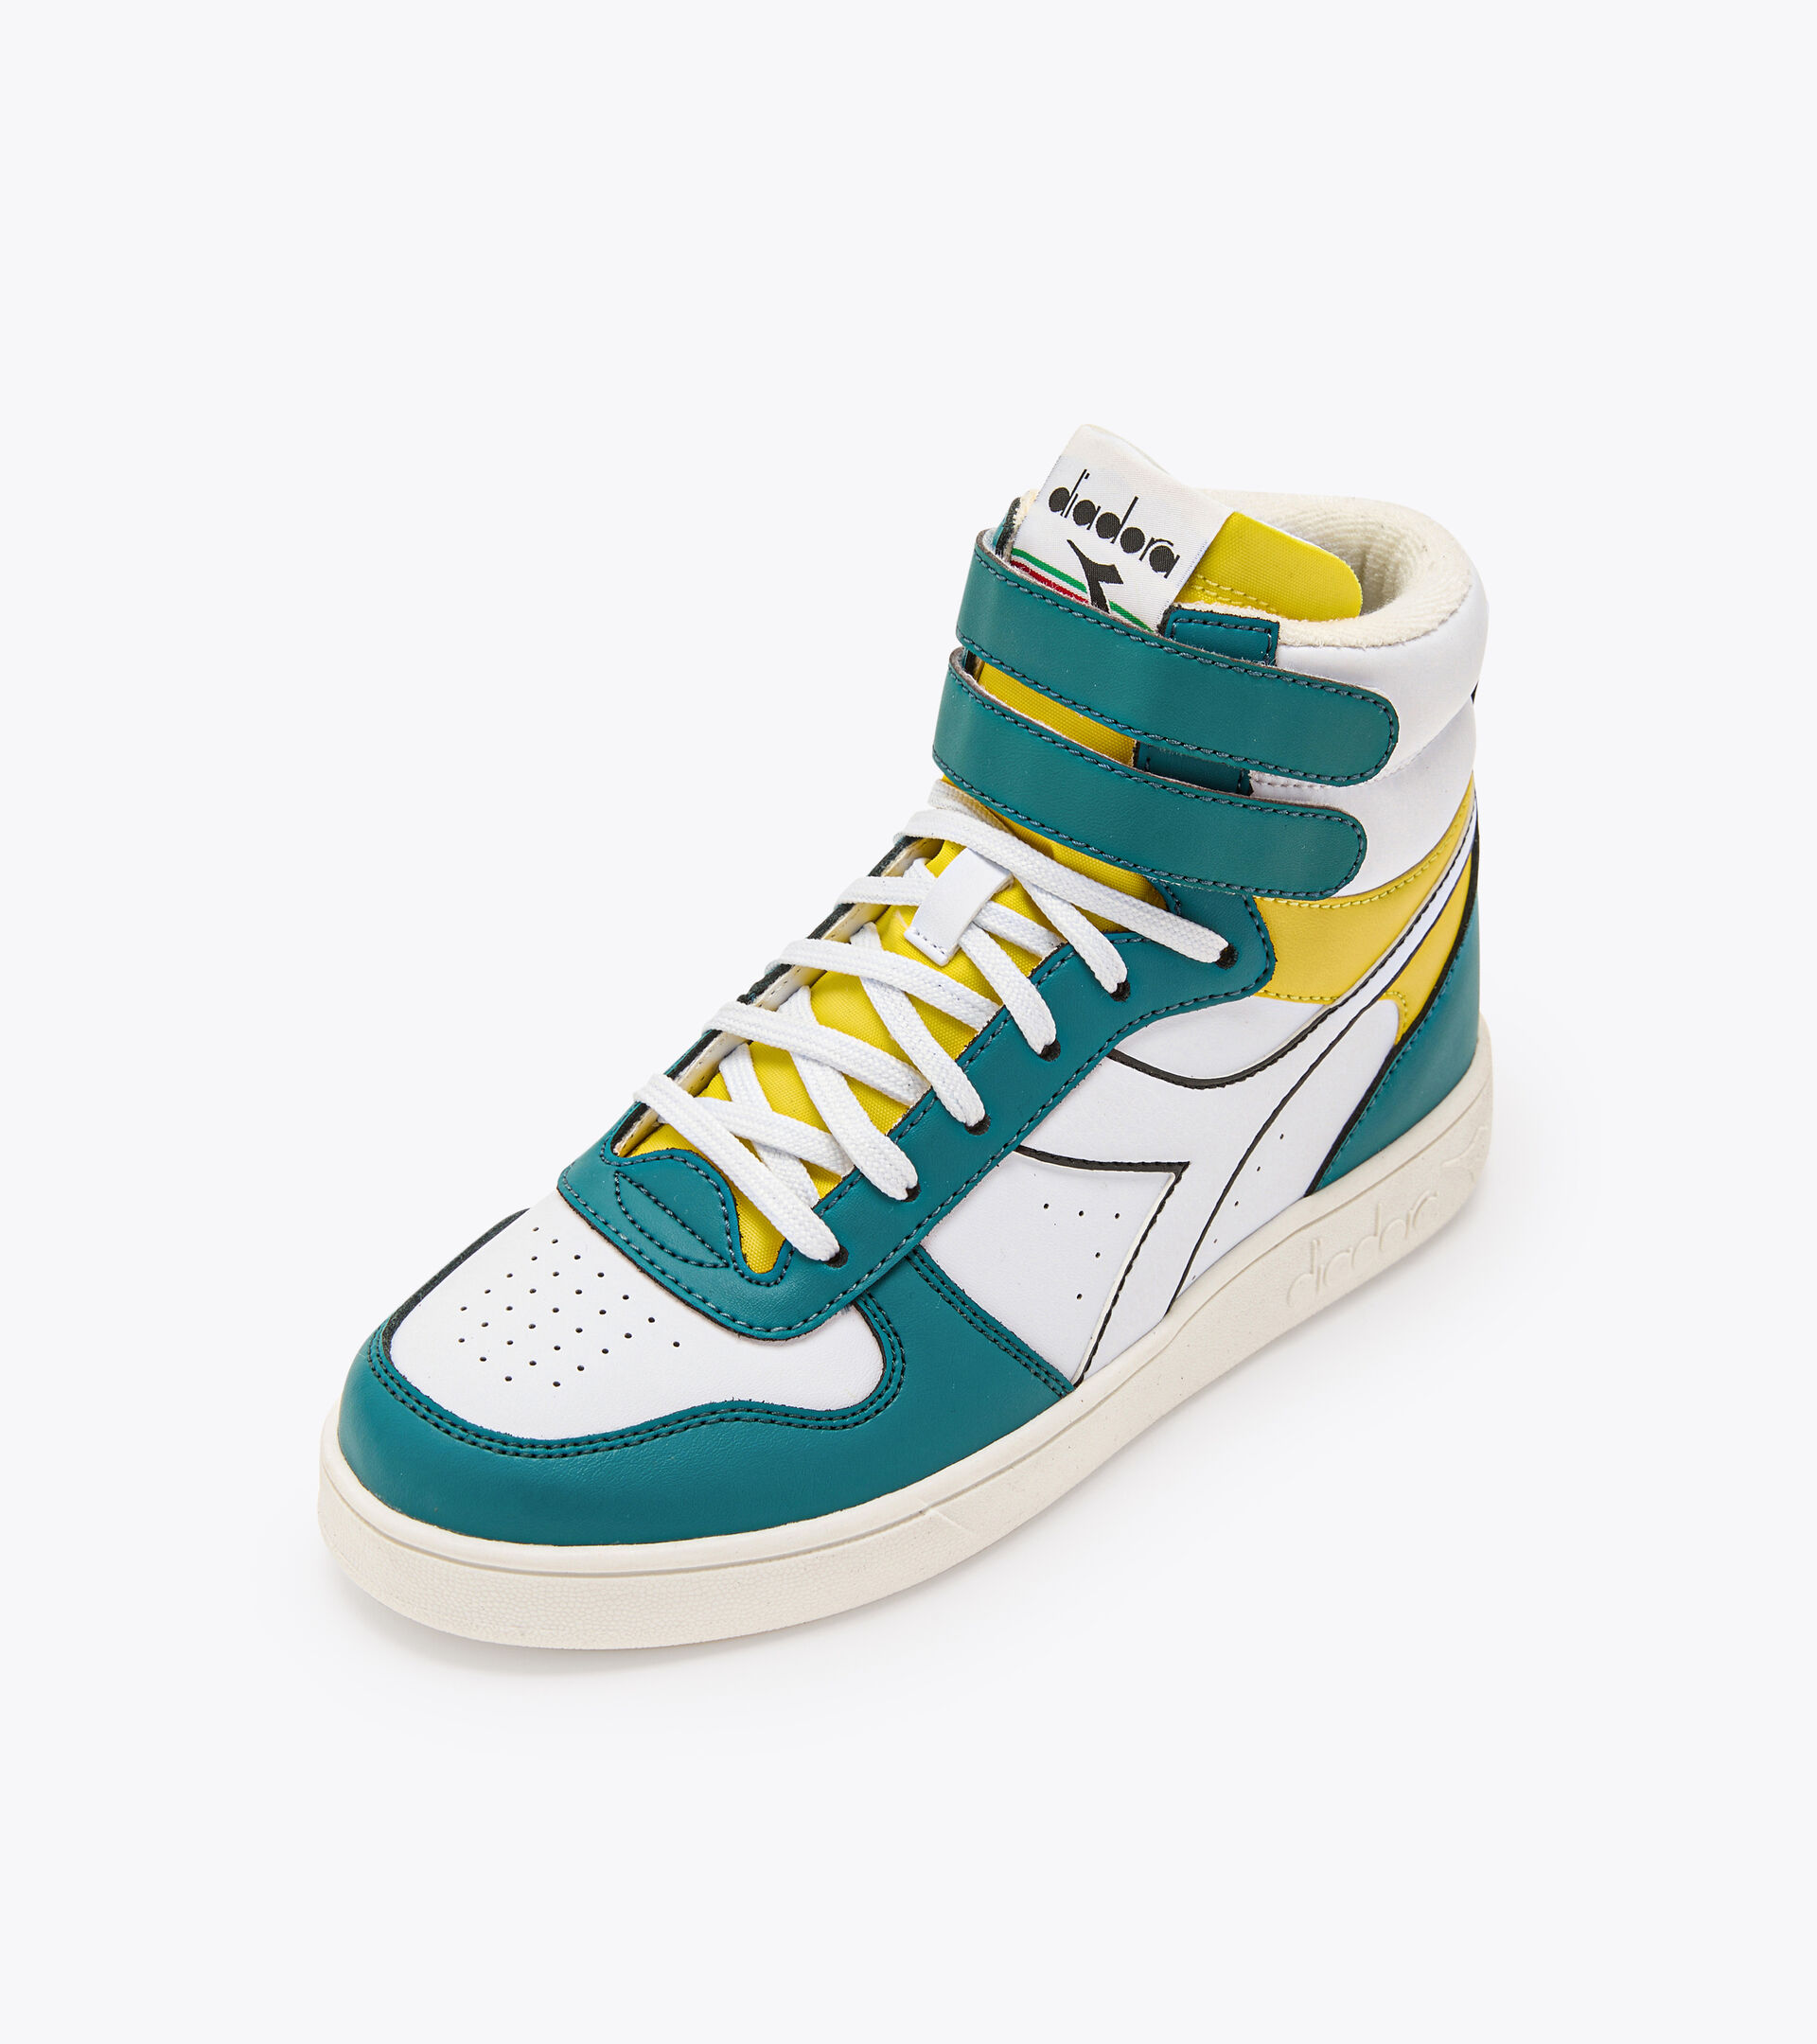 Sports shoes - Youth 8-16 years MAGIC BASKET MID GS DEEP LAKE/PASSION FRUIT - Diadora